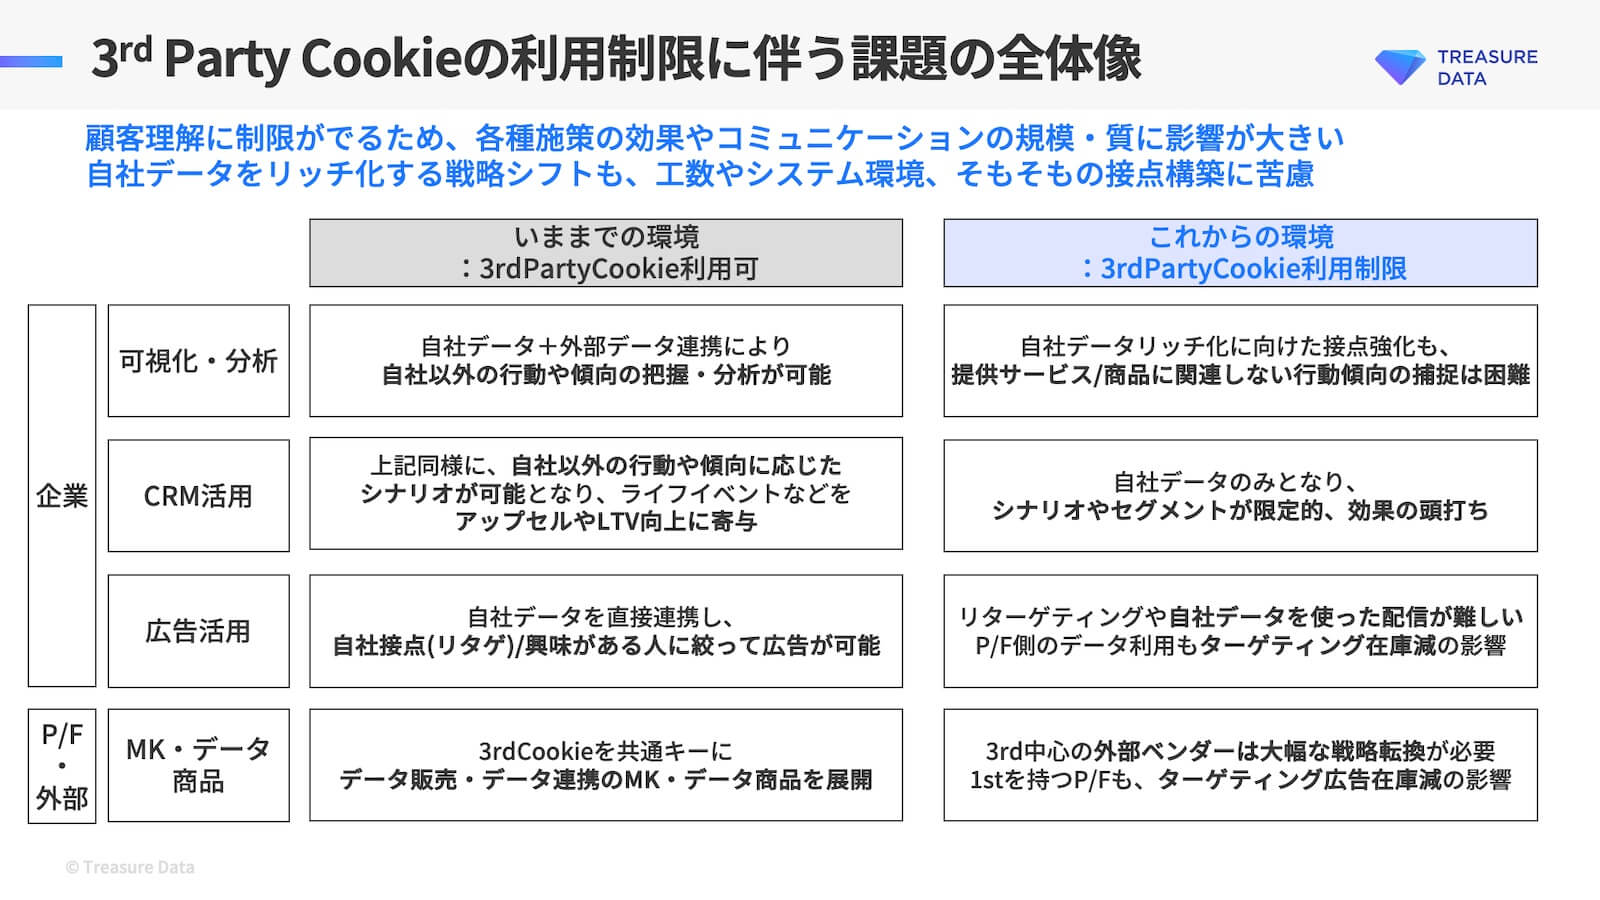 3rd Party Cookieの利用制限に伴う課題の全体像